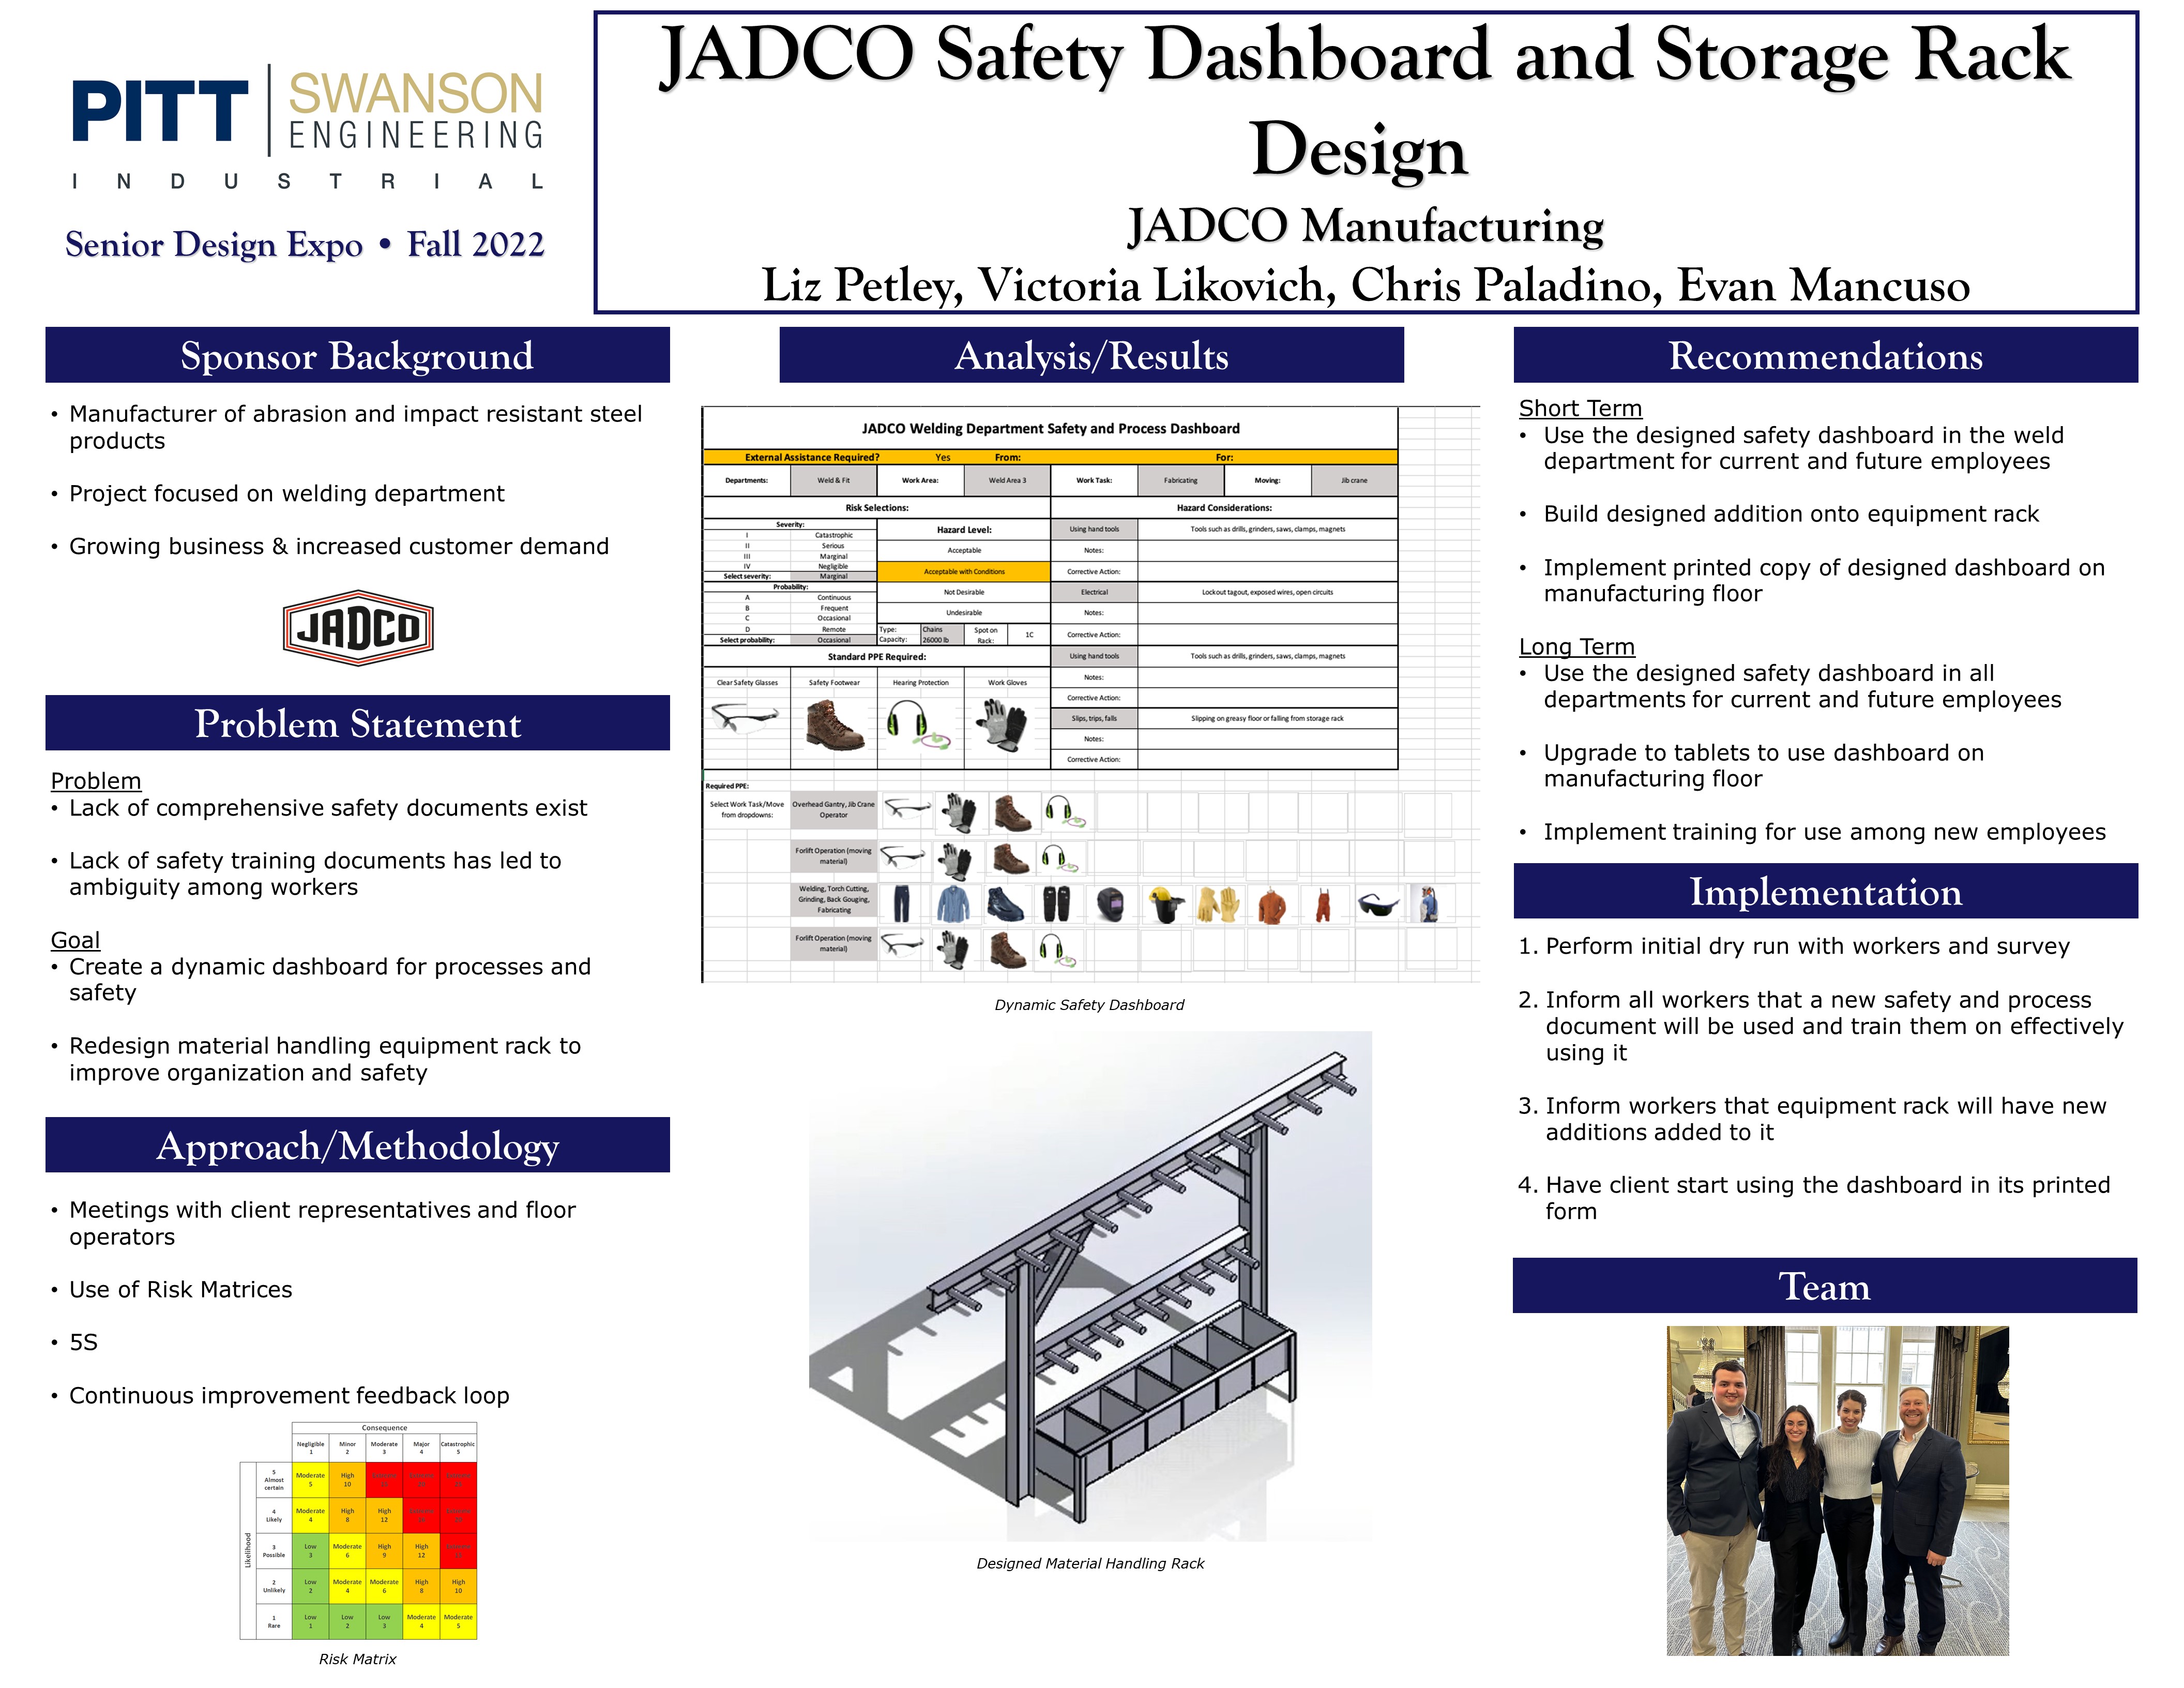 JADCO Safety Dashboard and Storage Rack Design  research poster